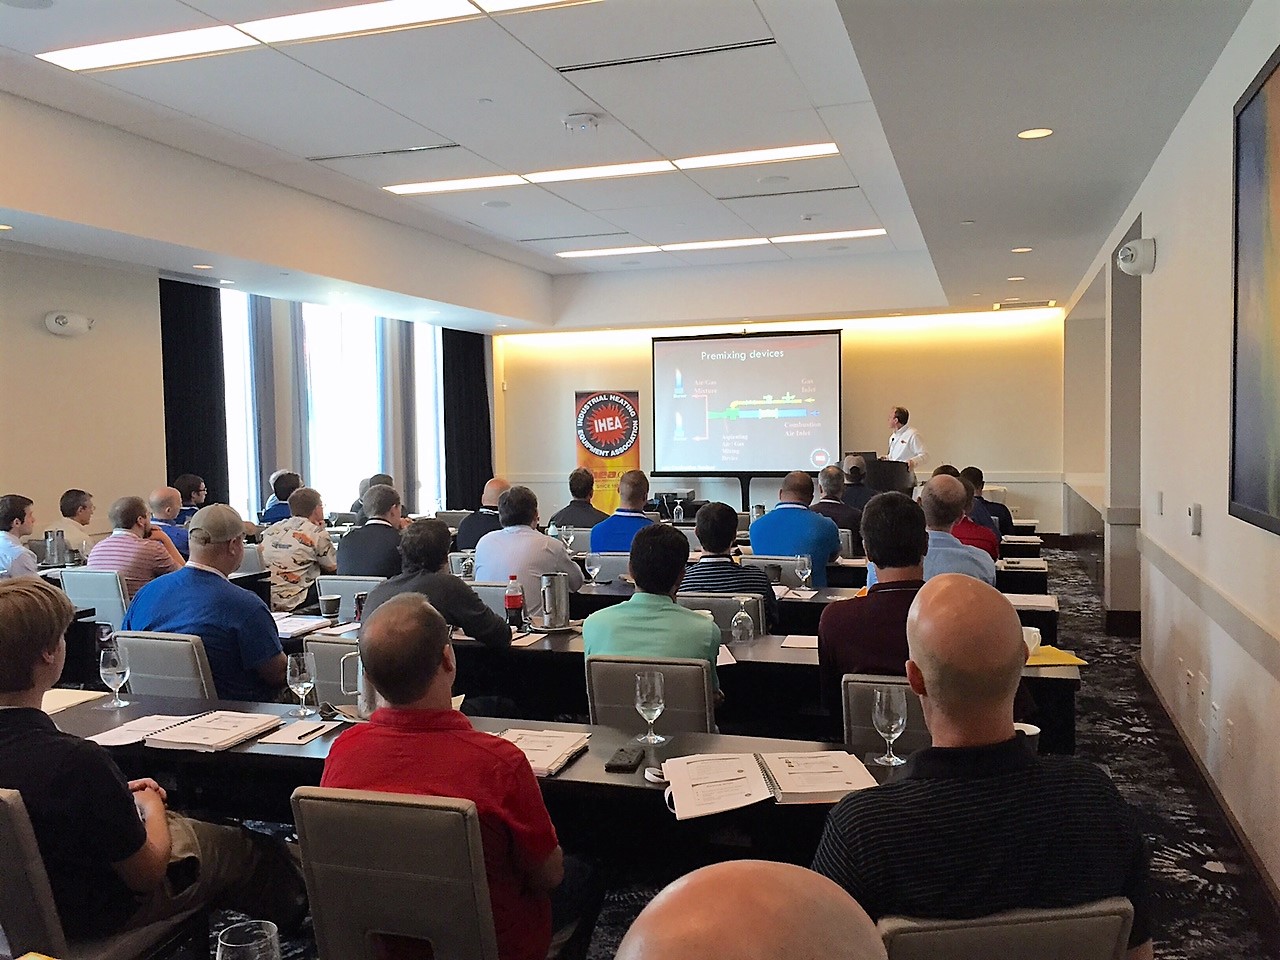 Attendees receive valuable technical information at IHEA’s seminar.